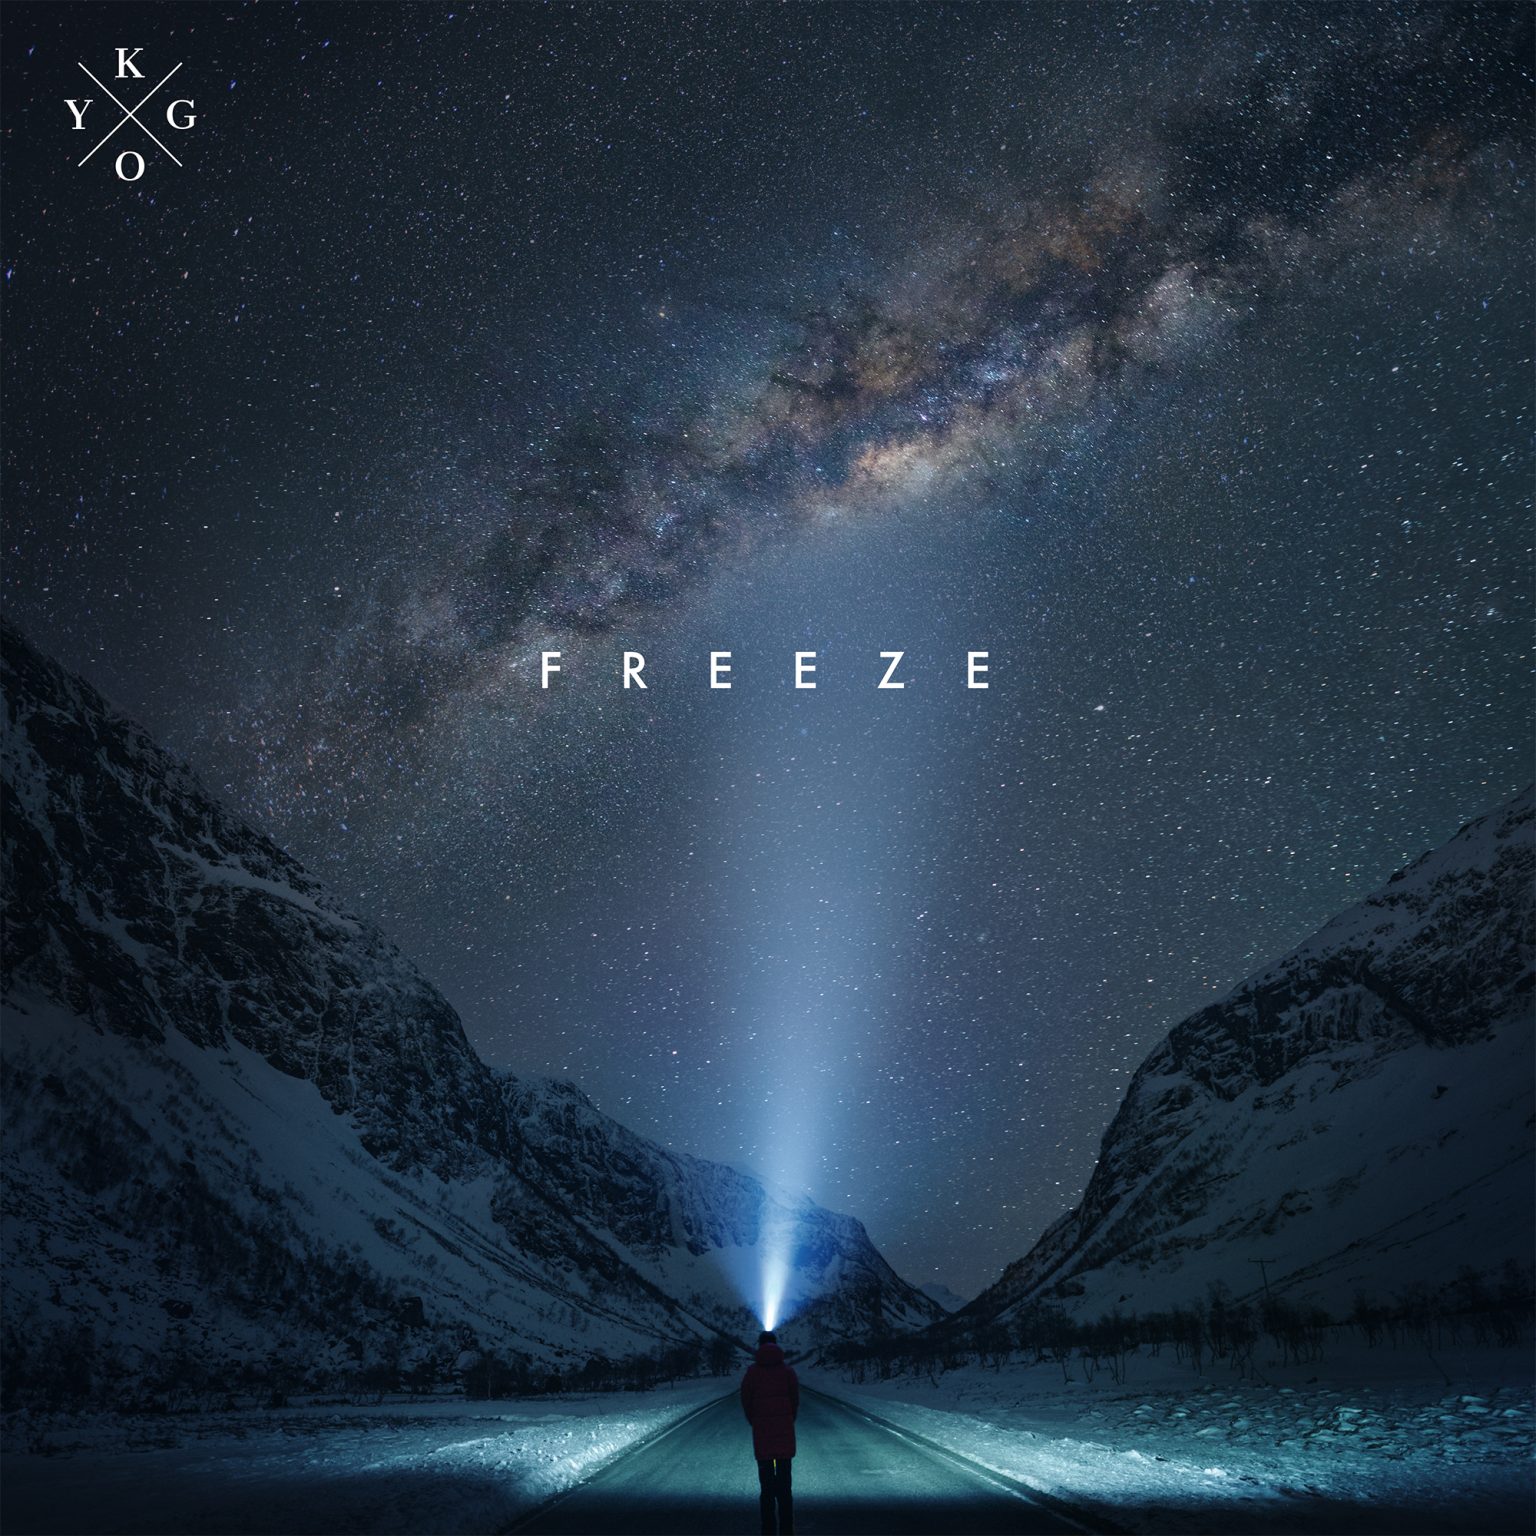 KYGO RELEASES NEW SINGLE + VIDEO "FREEZE" RCA Records